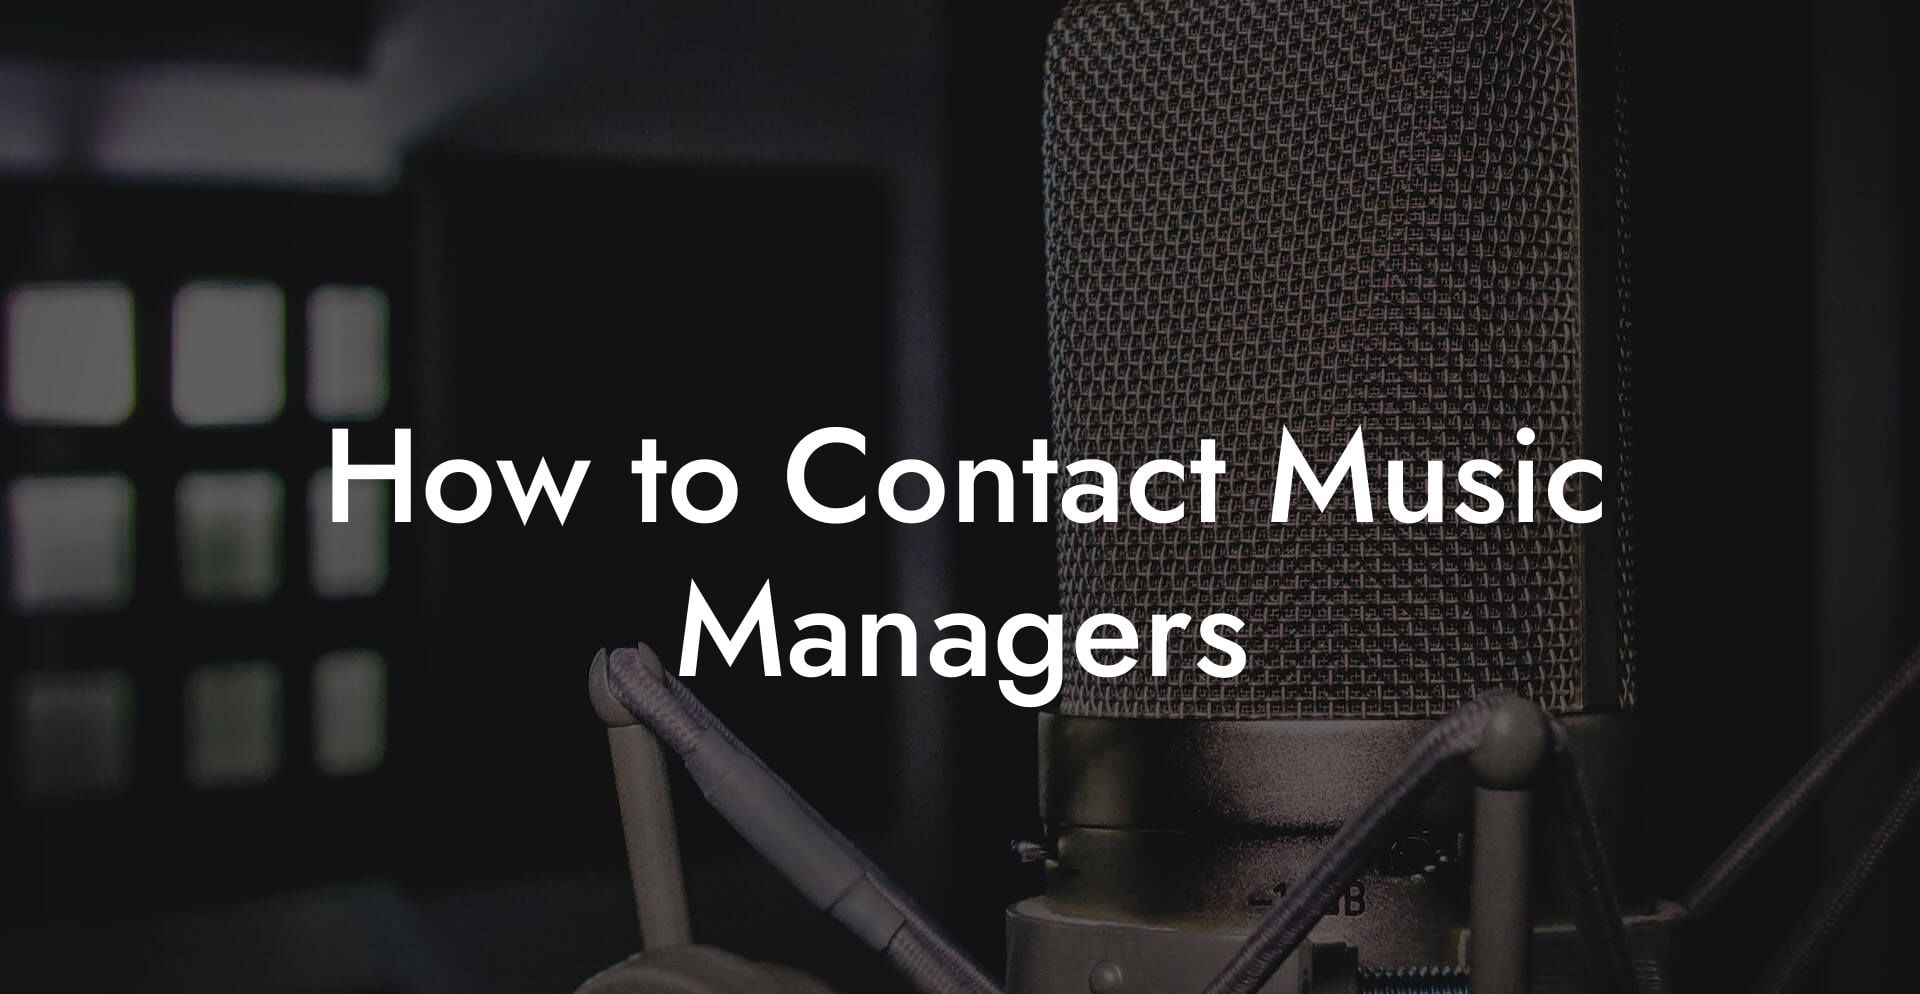 How to Contact Music Managers